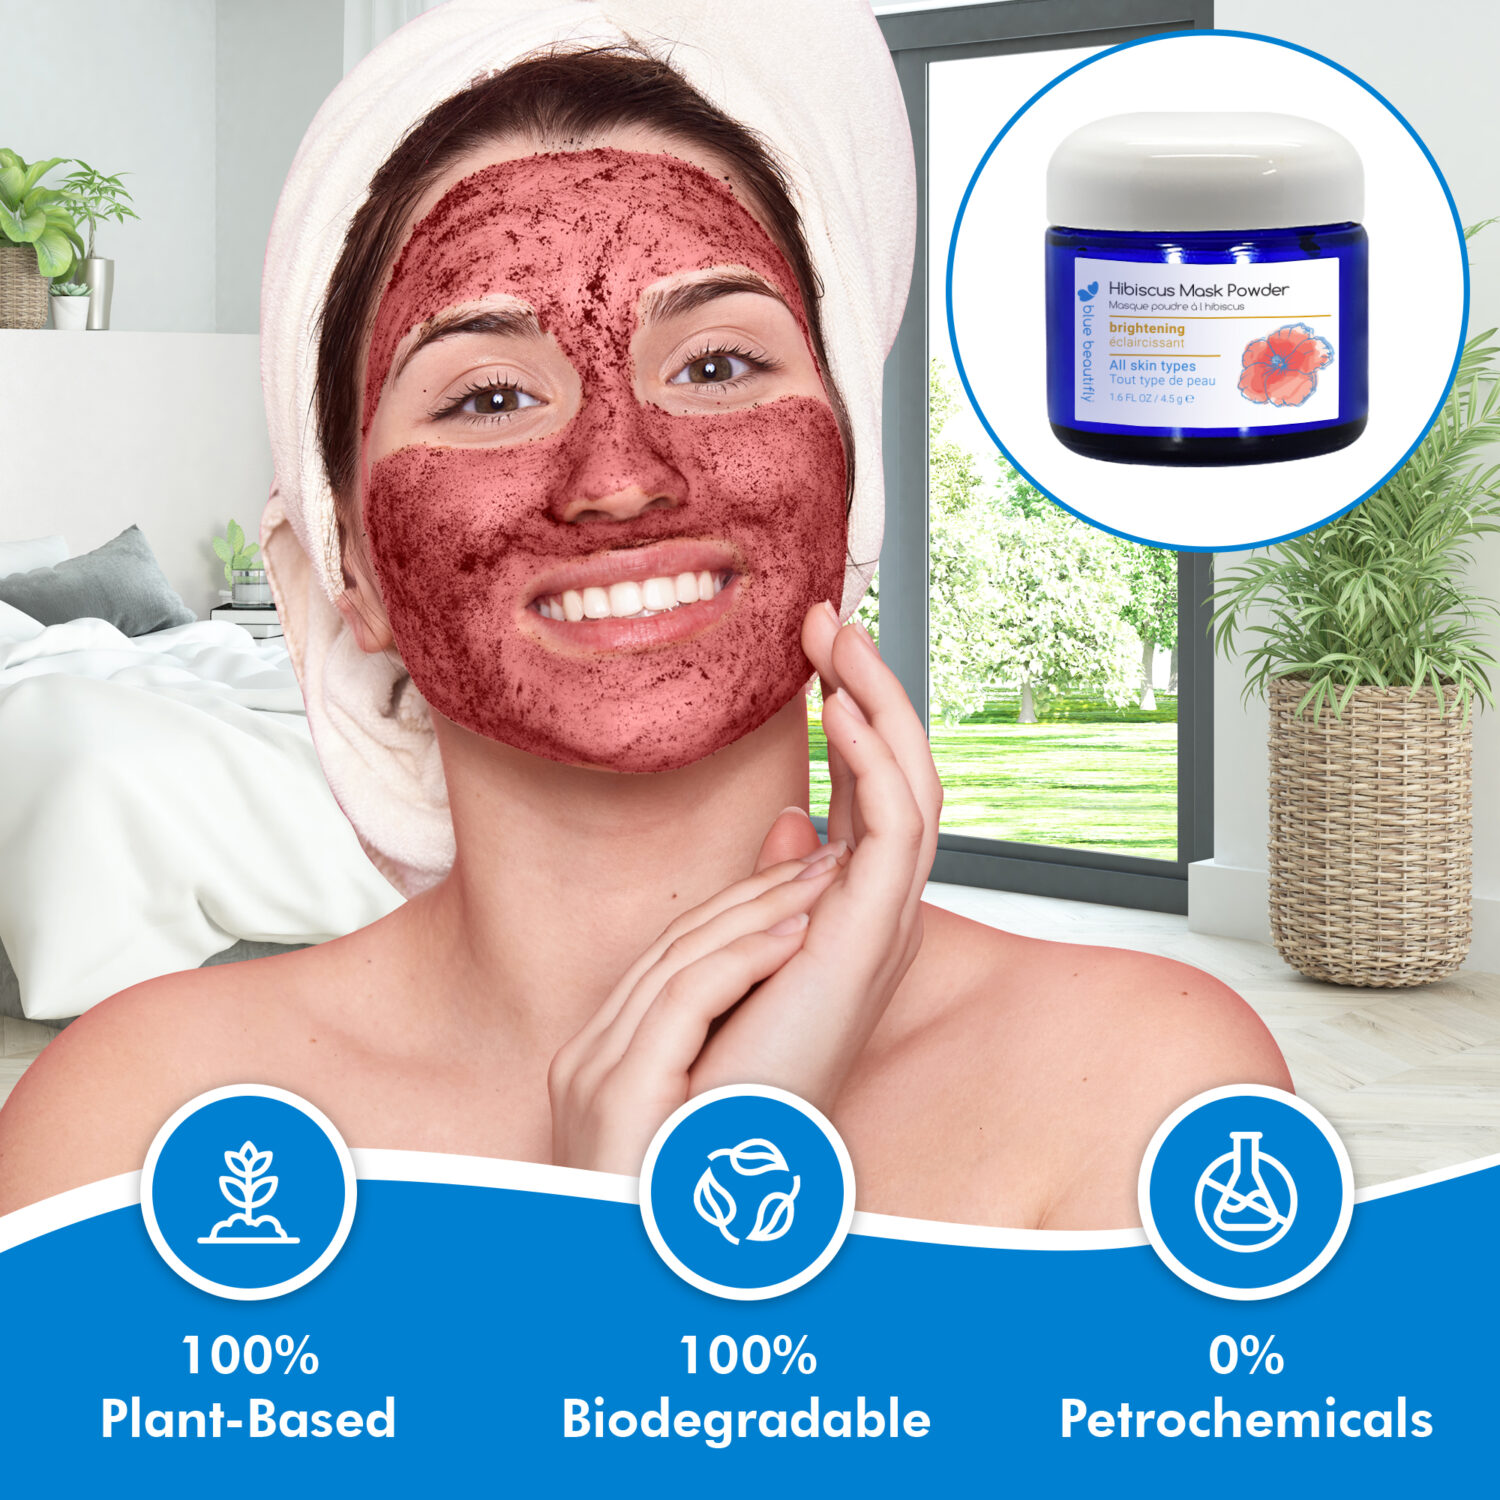 Blue Beautifly Hibiscus Mask Powder is 100% plant-based and biodegradable and contains no petrochemicals or toxins